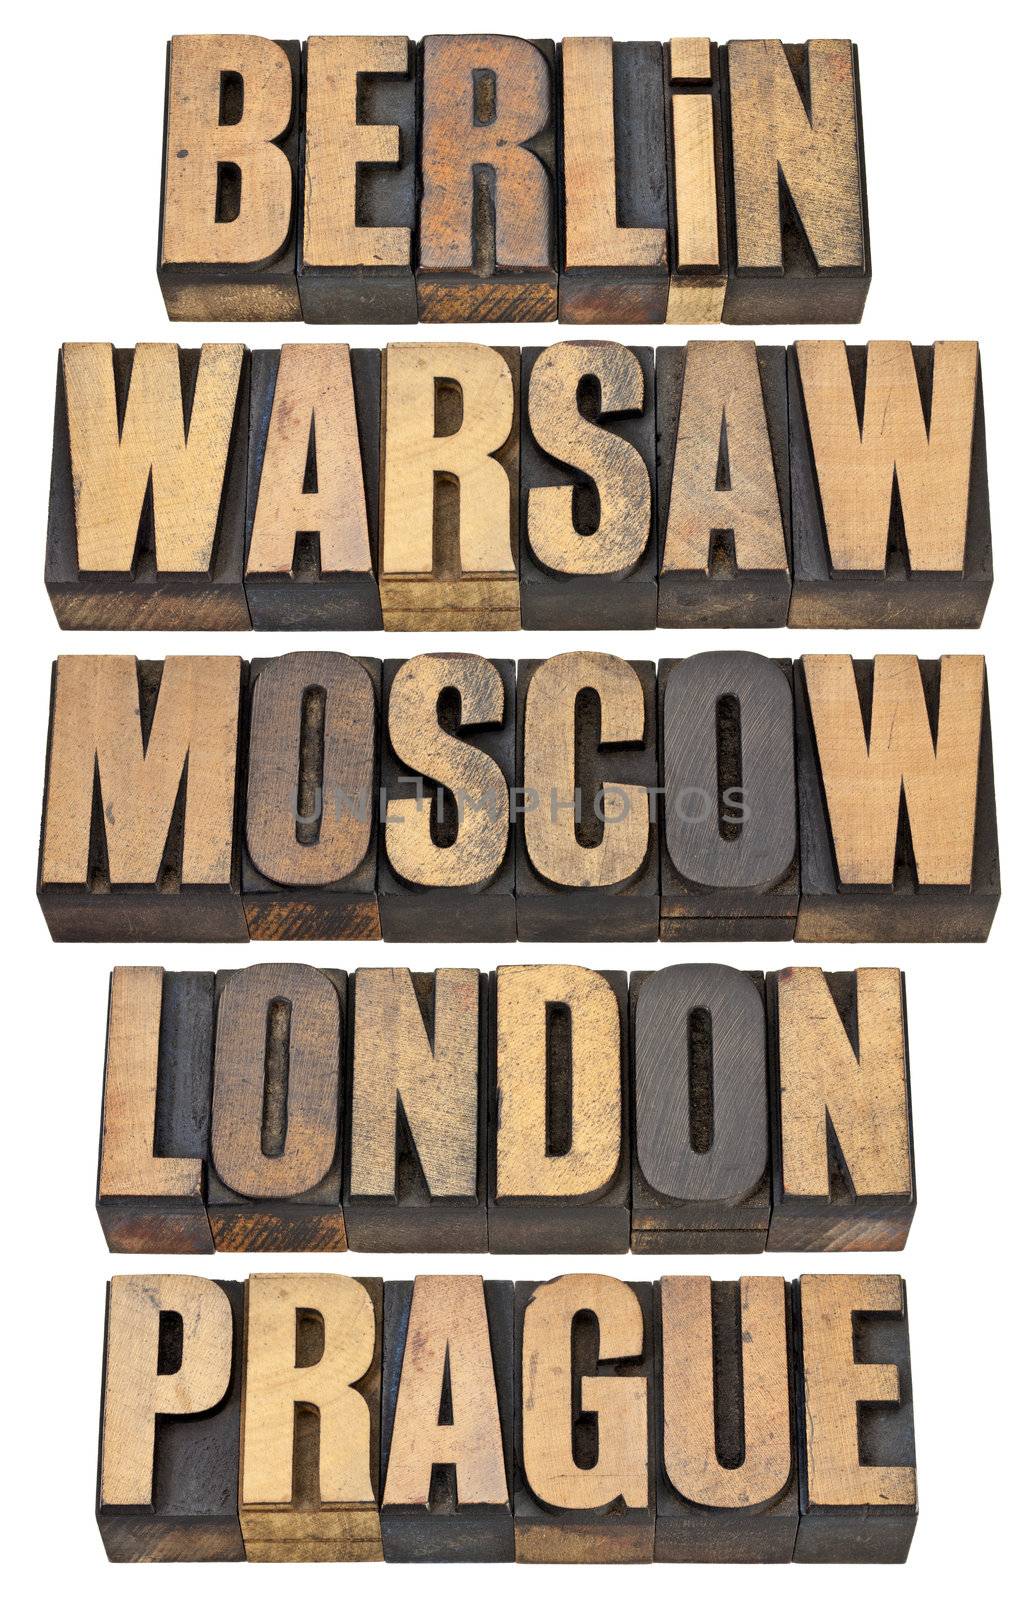 Berlin, Warsaw, Moscow, London and Prague by PixelsAway